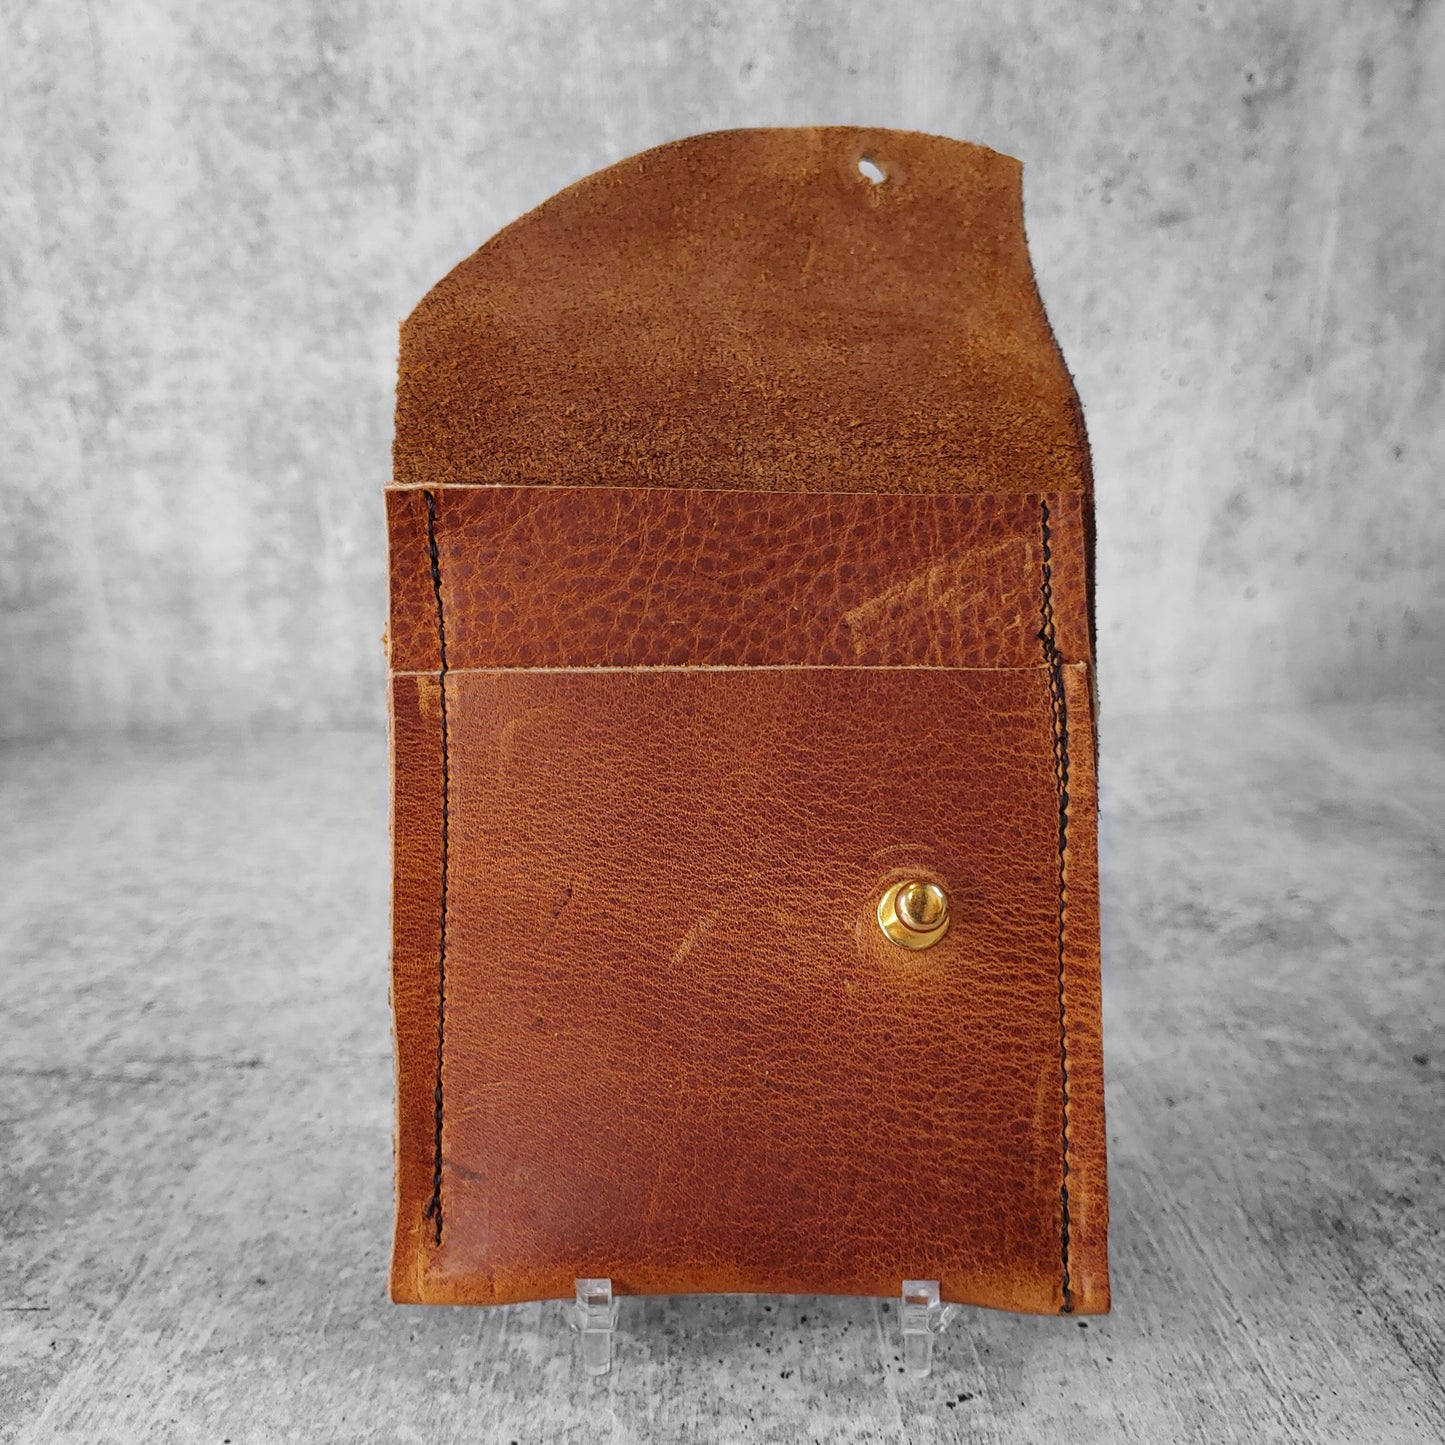 Open, front facing view of "soft leather wallet right" in pecan brown against a concrete background. Pockets visible.